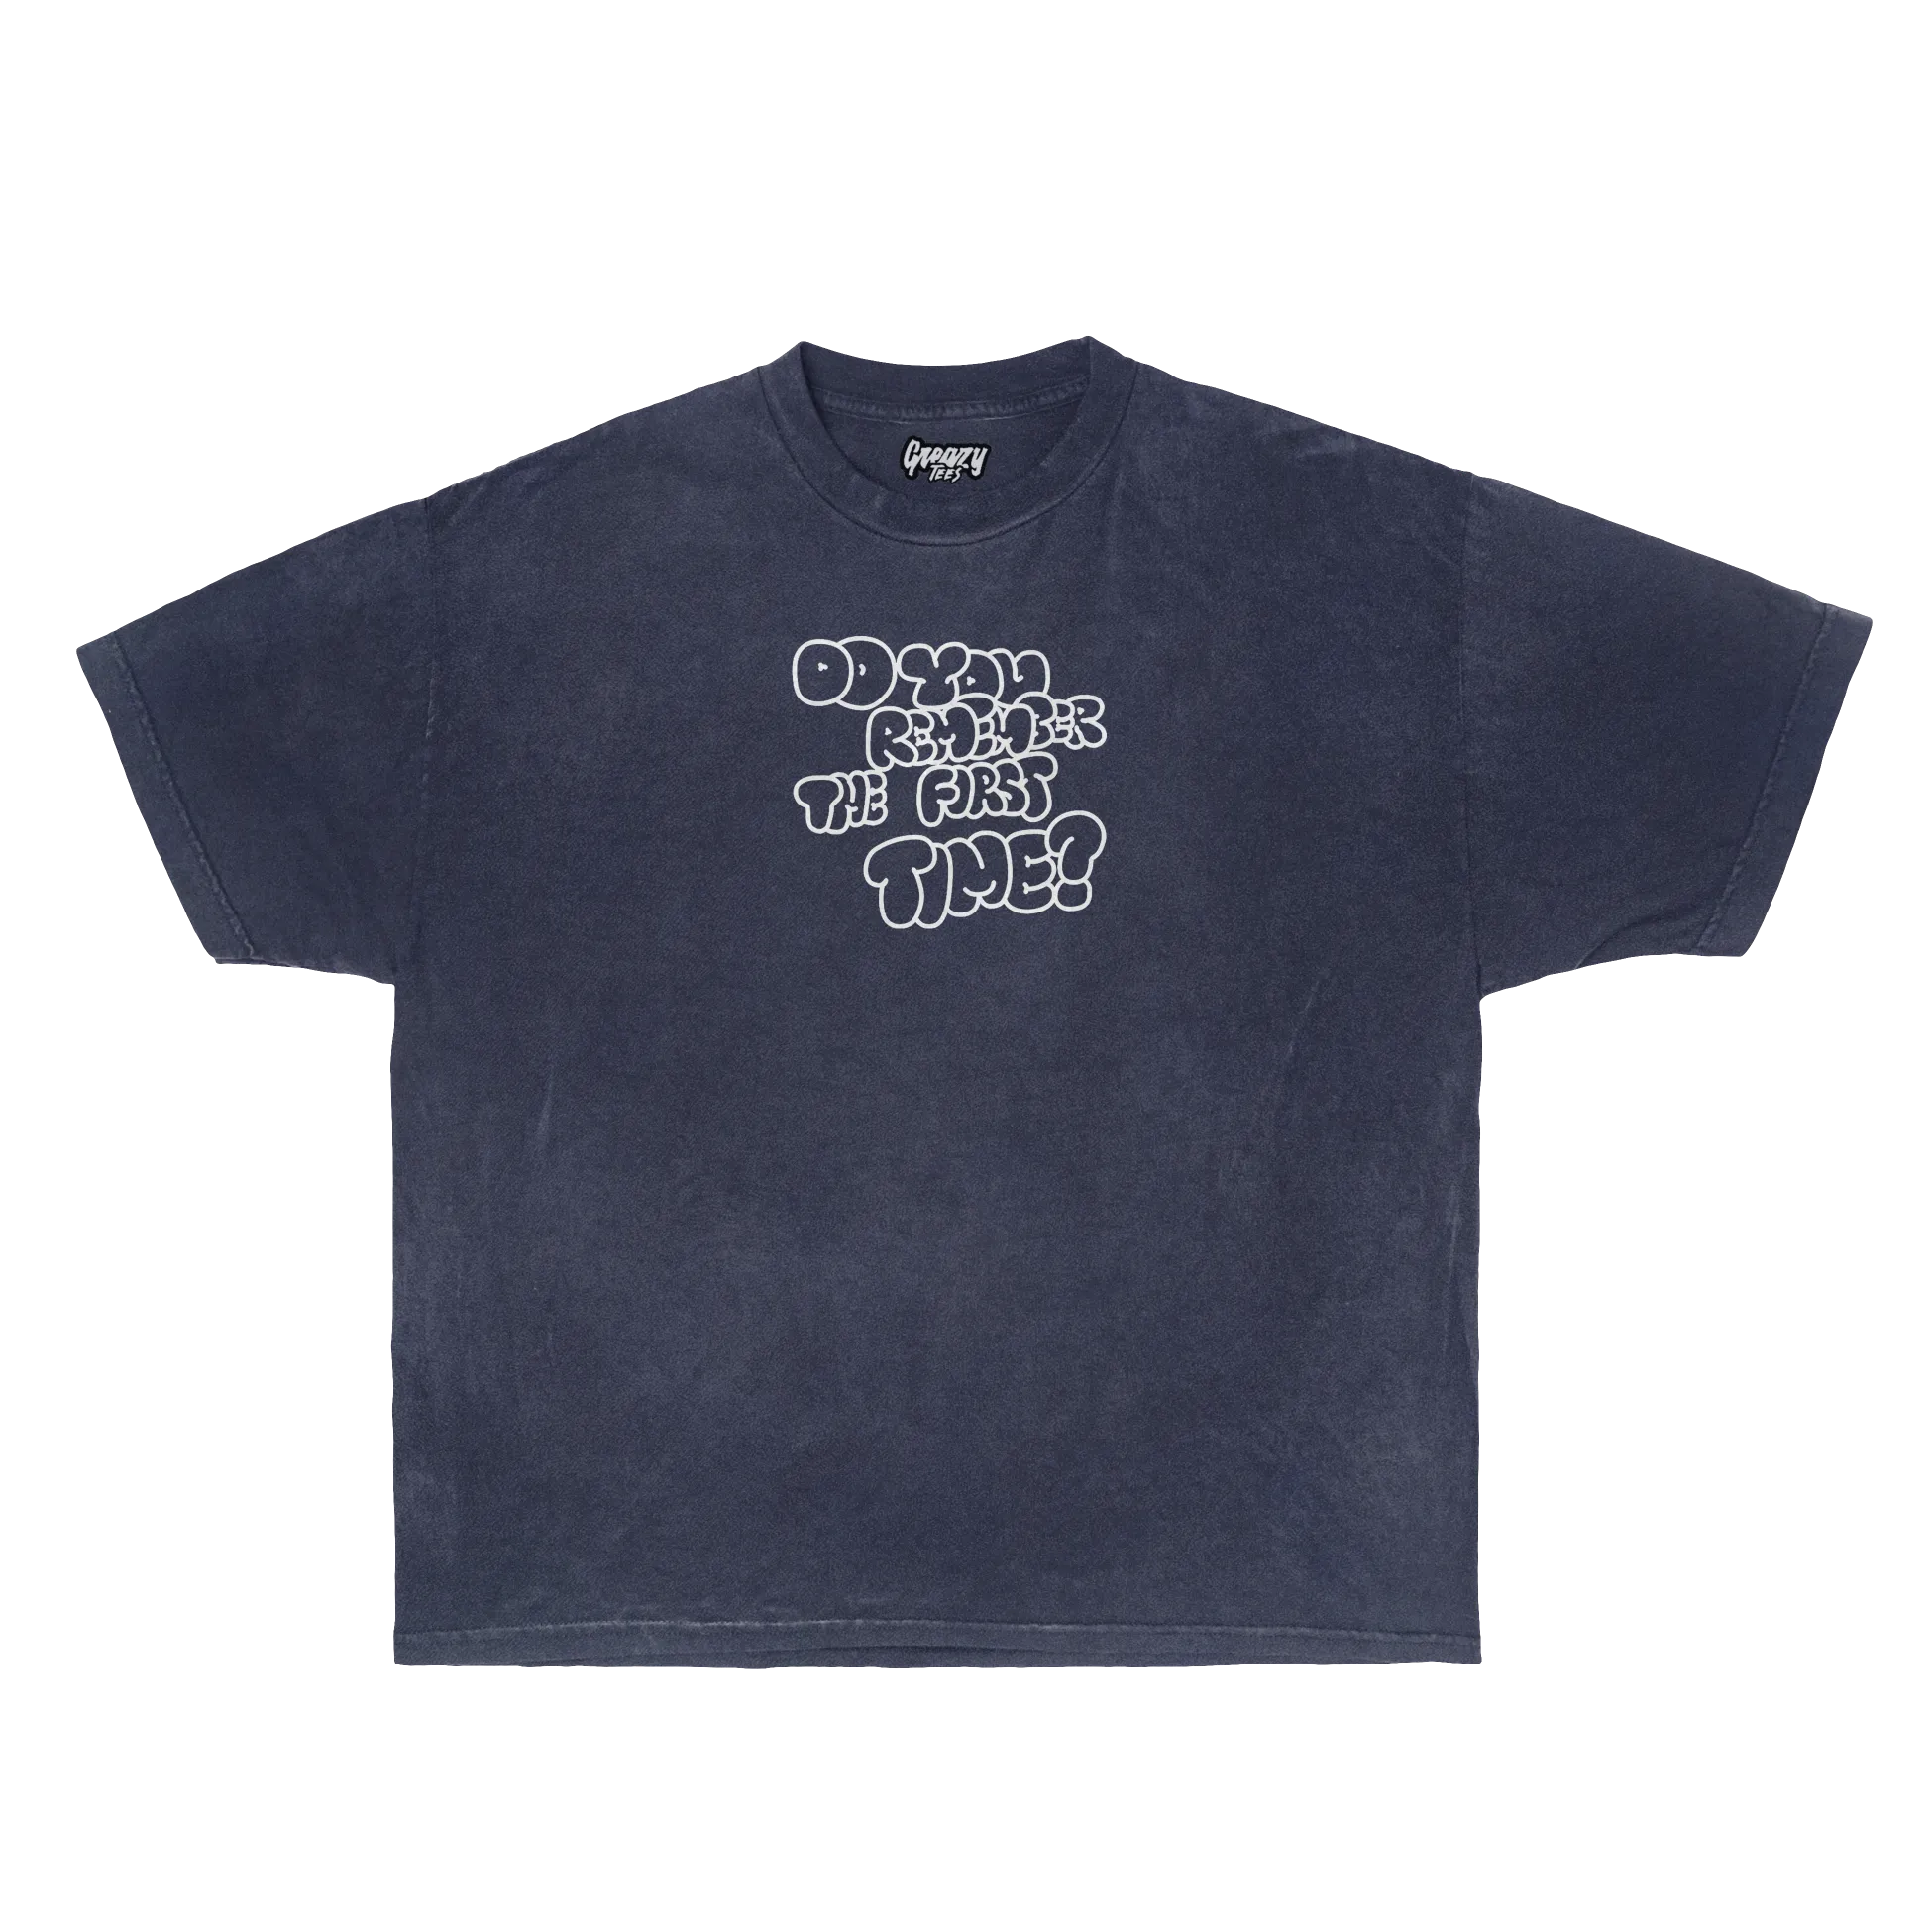 First Time Tee Tee Greazy Tees XS Navy Oversized